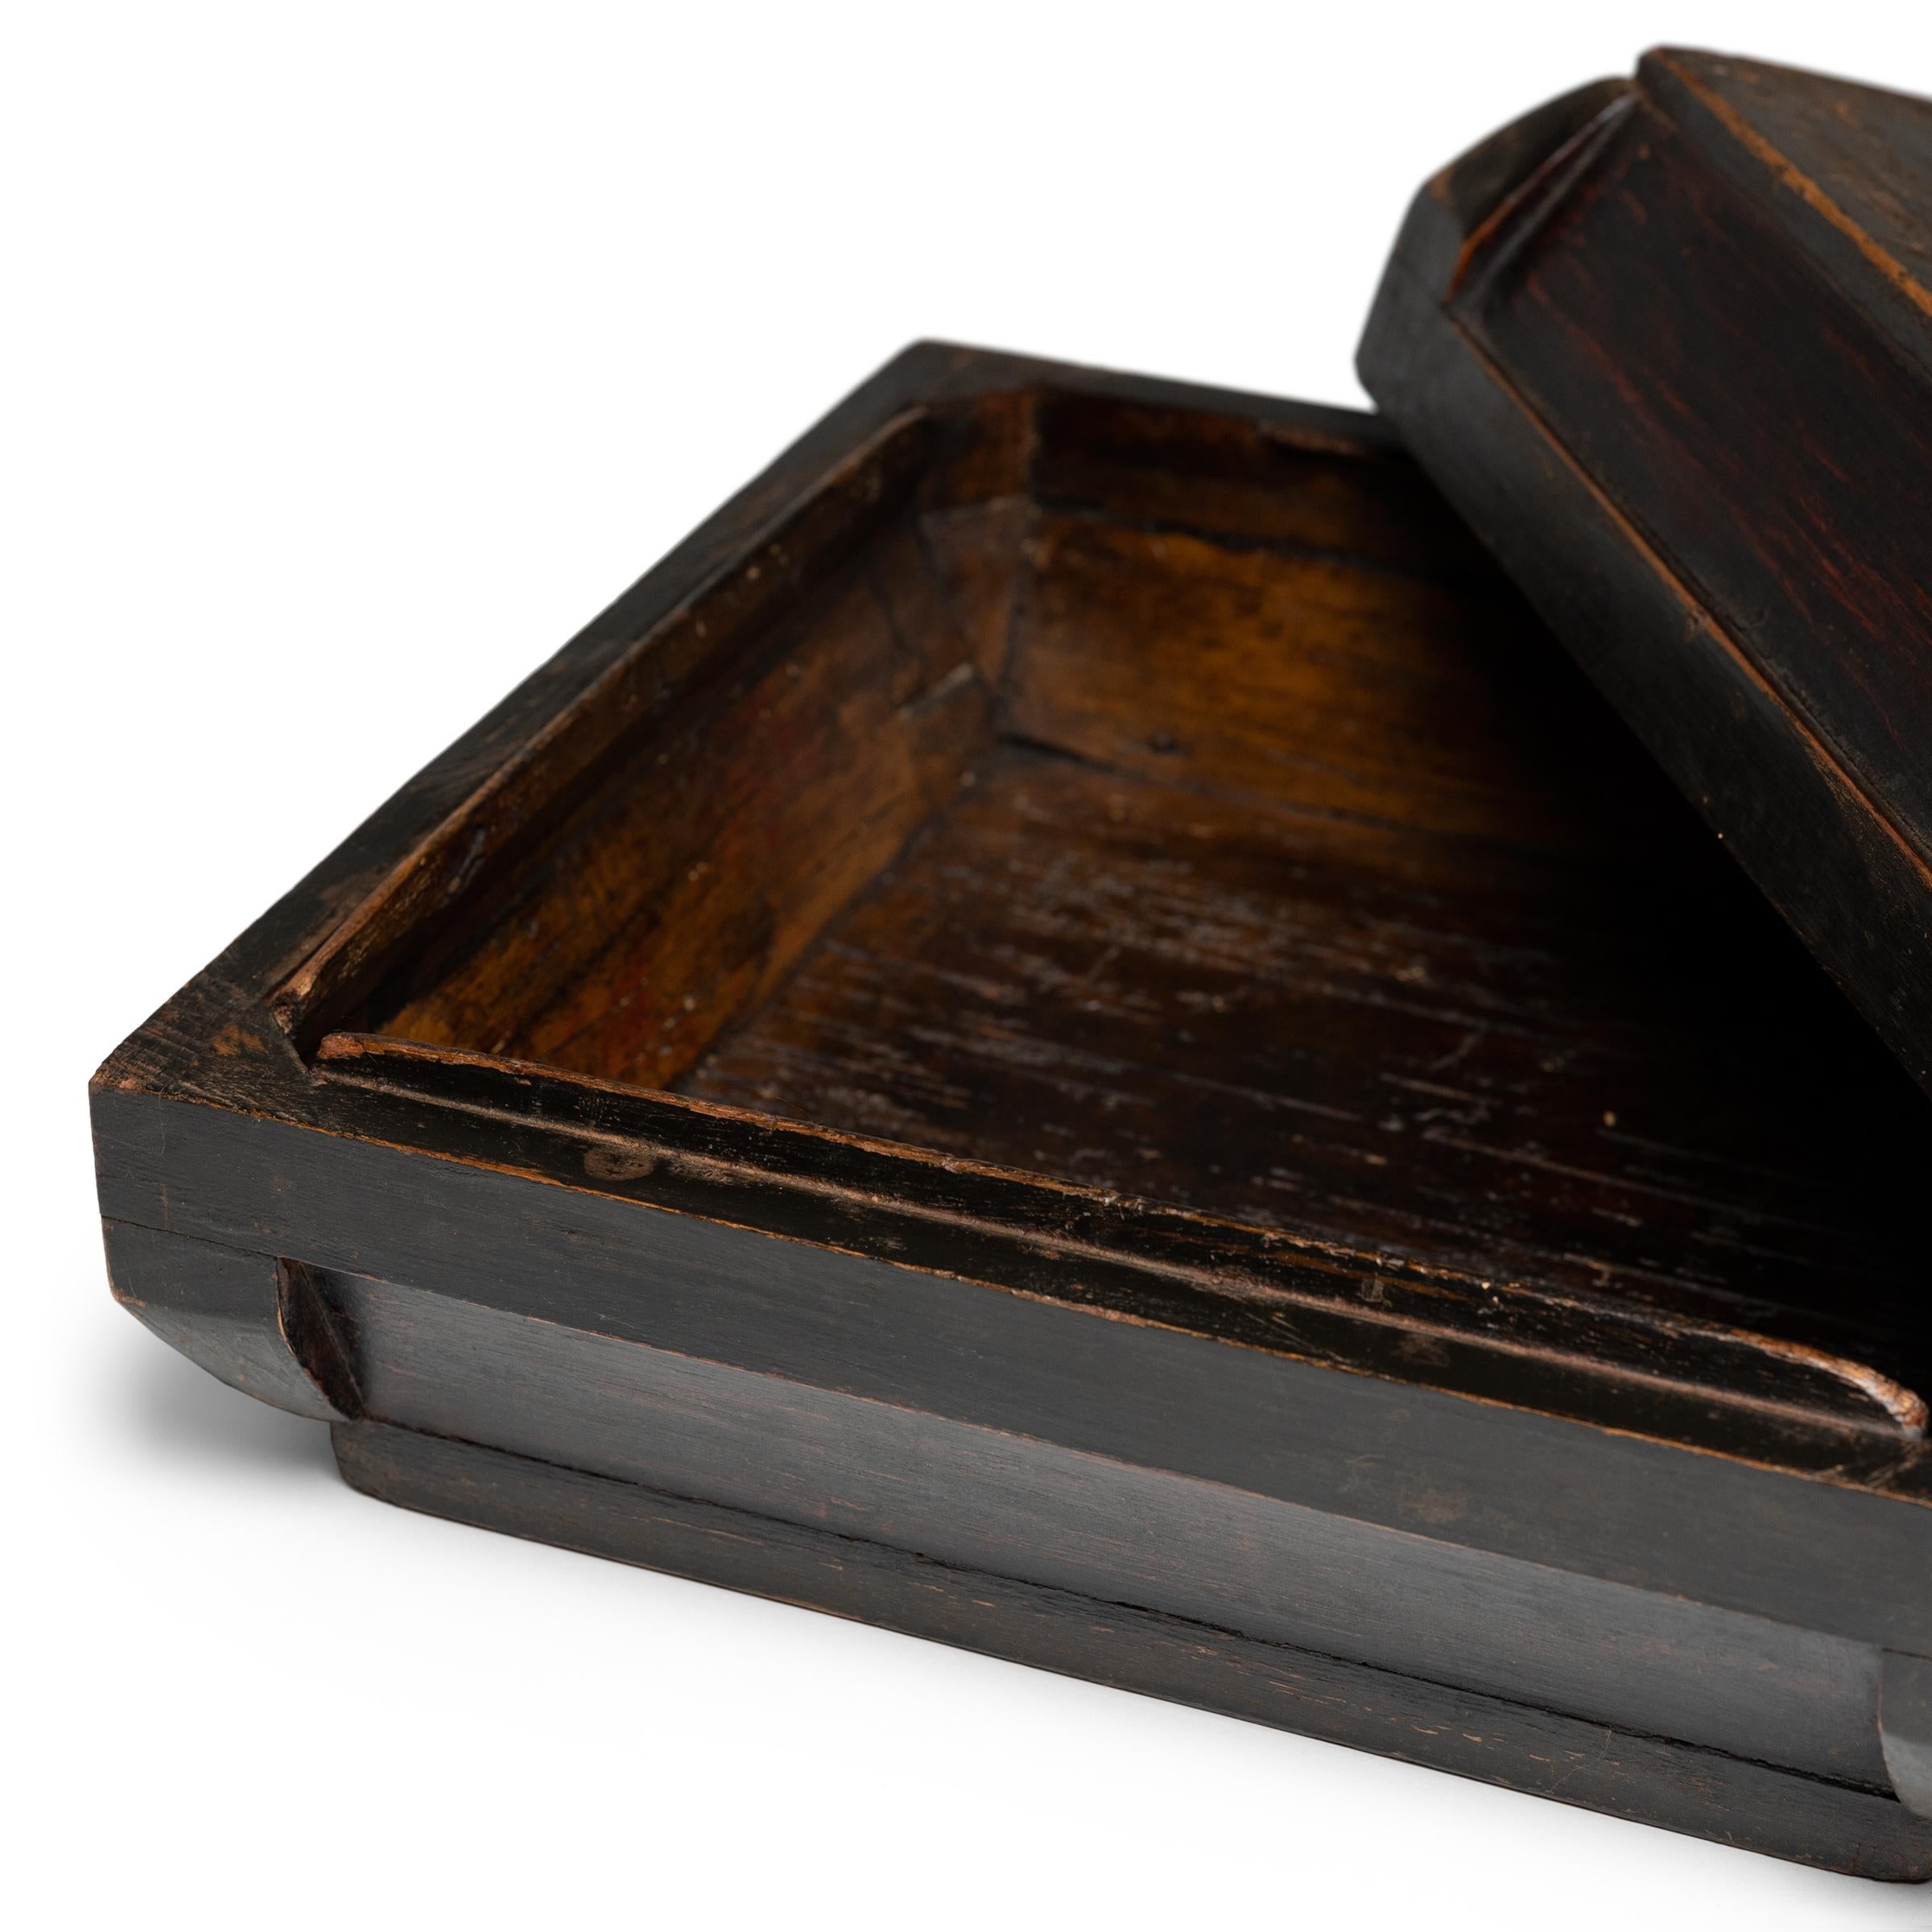 19th Century Chinese Lacquered Snack Box, c. 1820